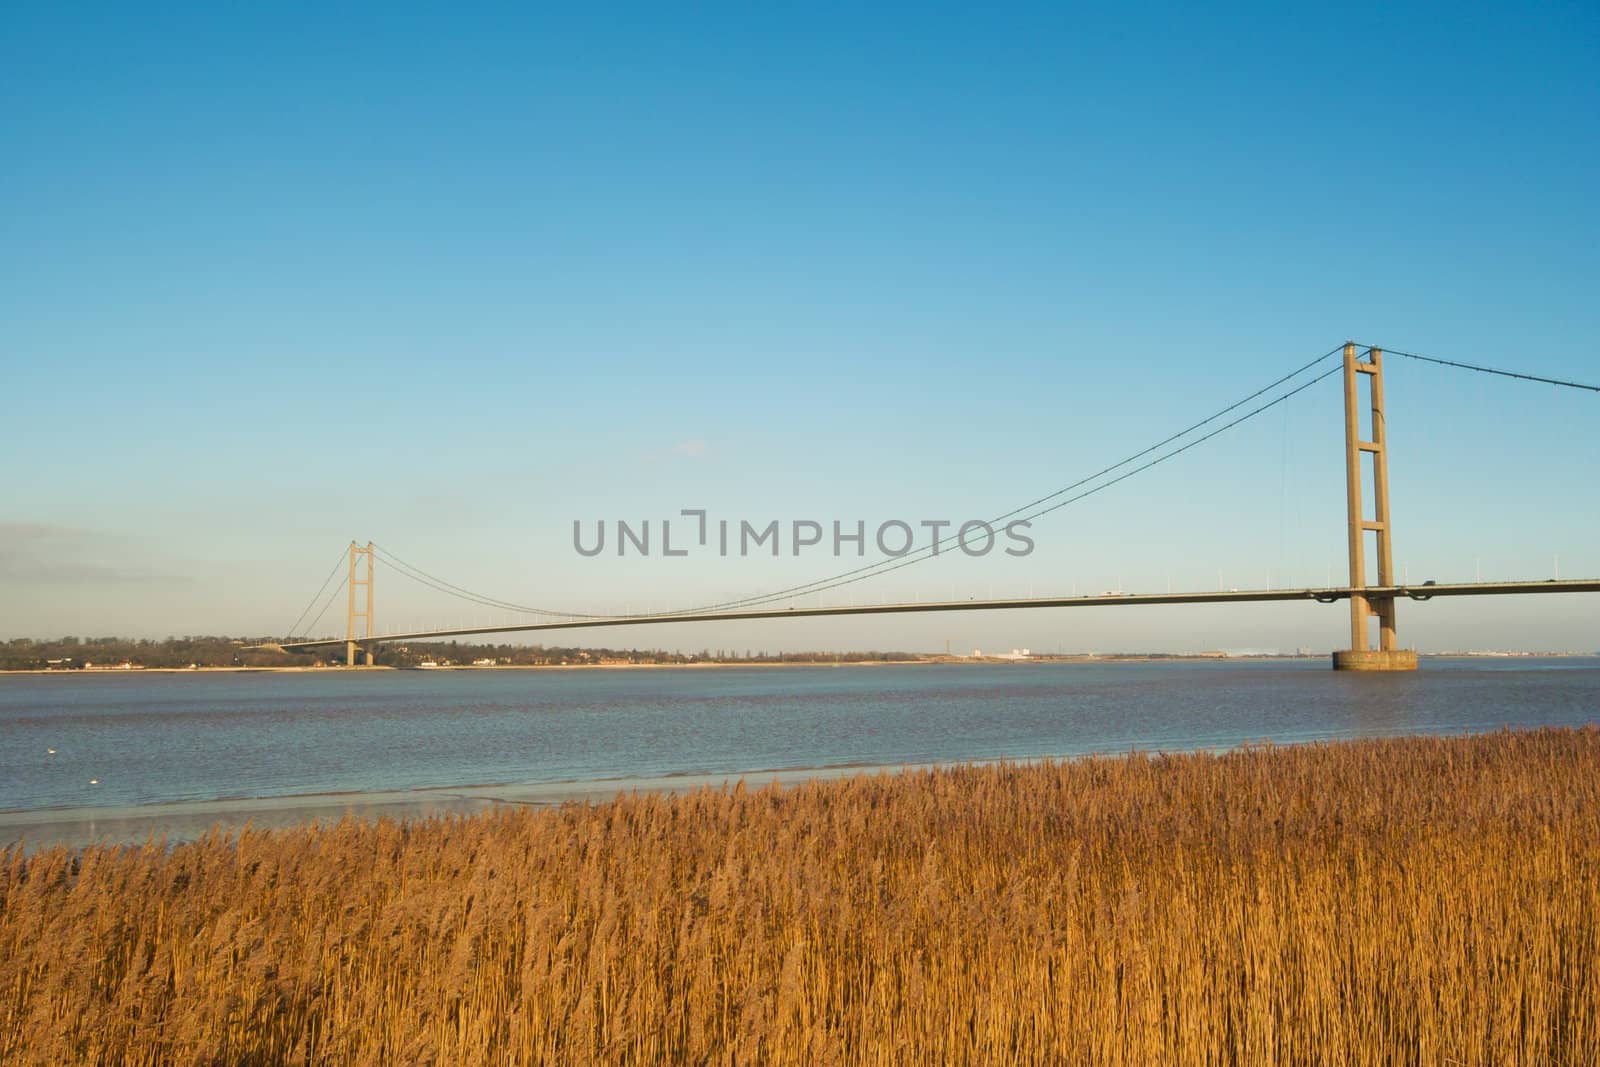 A photo of the Humber bridge taken from the south bank of the river Humber UK